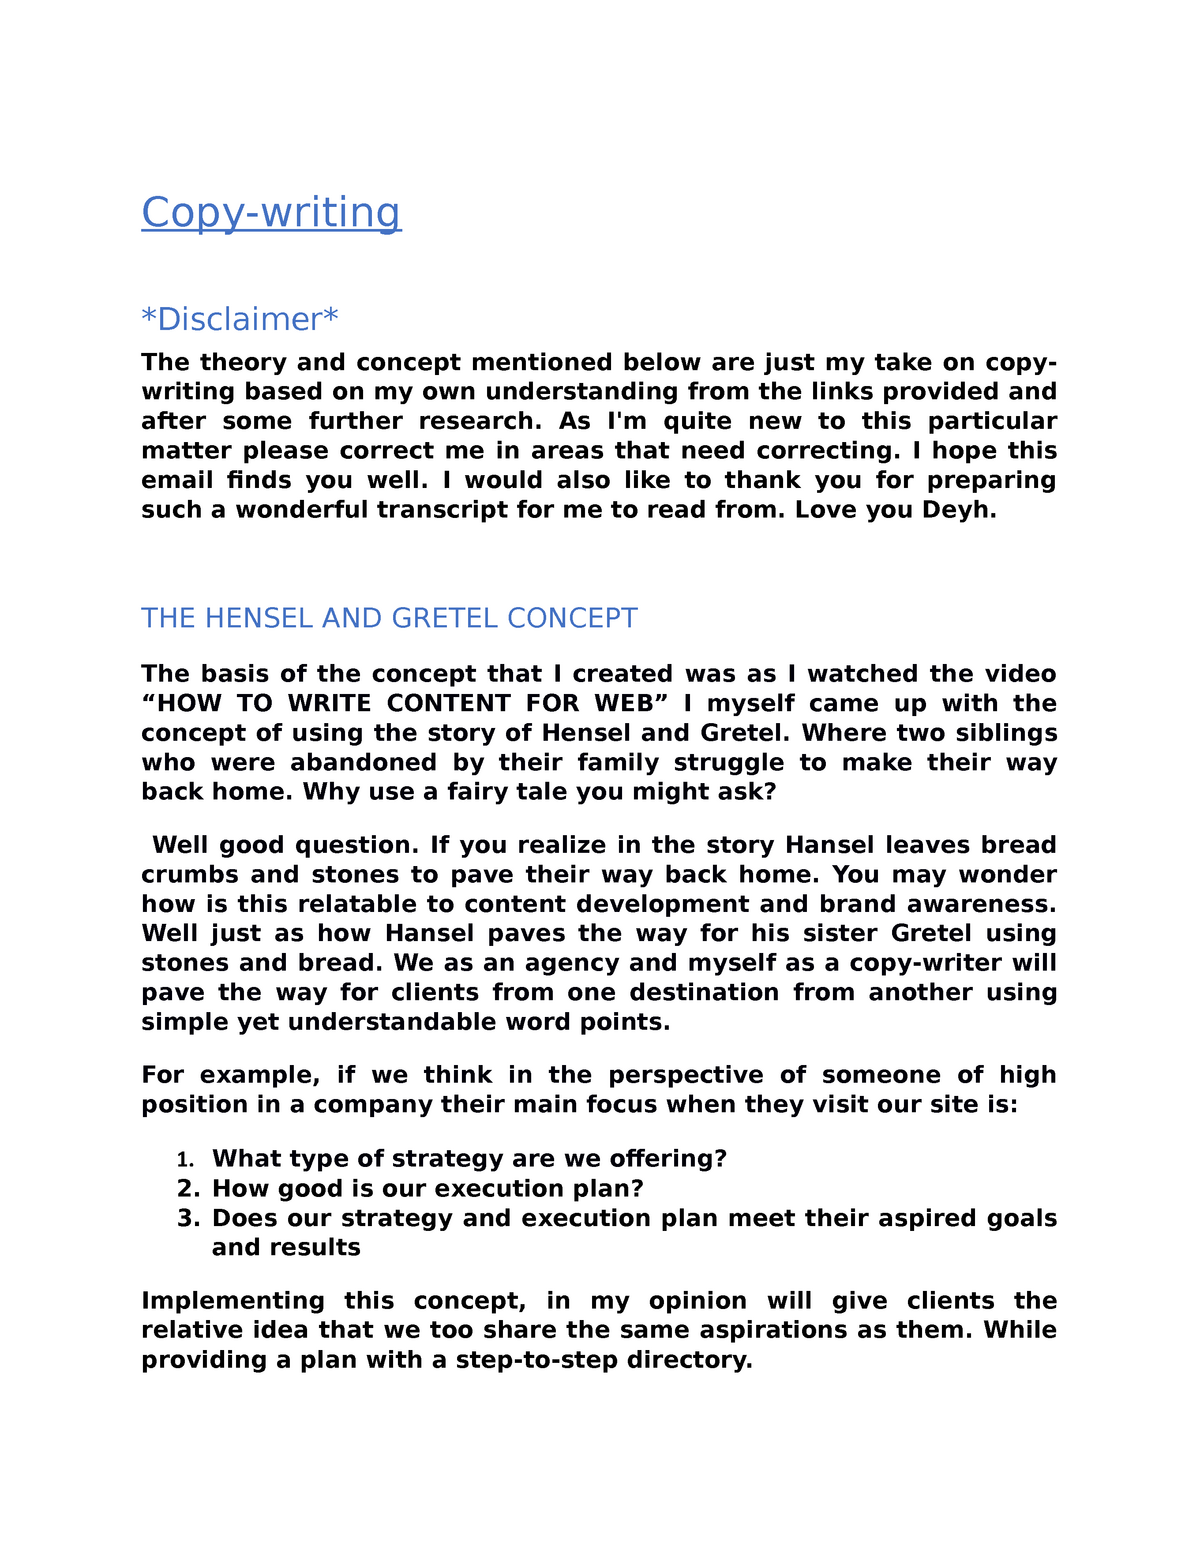 Copy writing for beginners and how to gain profit - Copy-writing